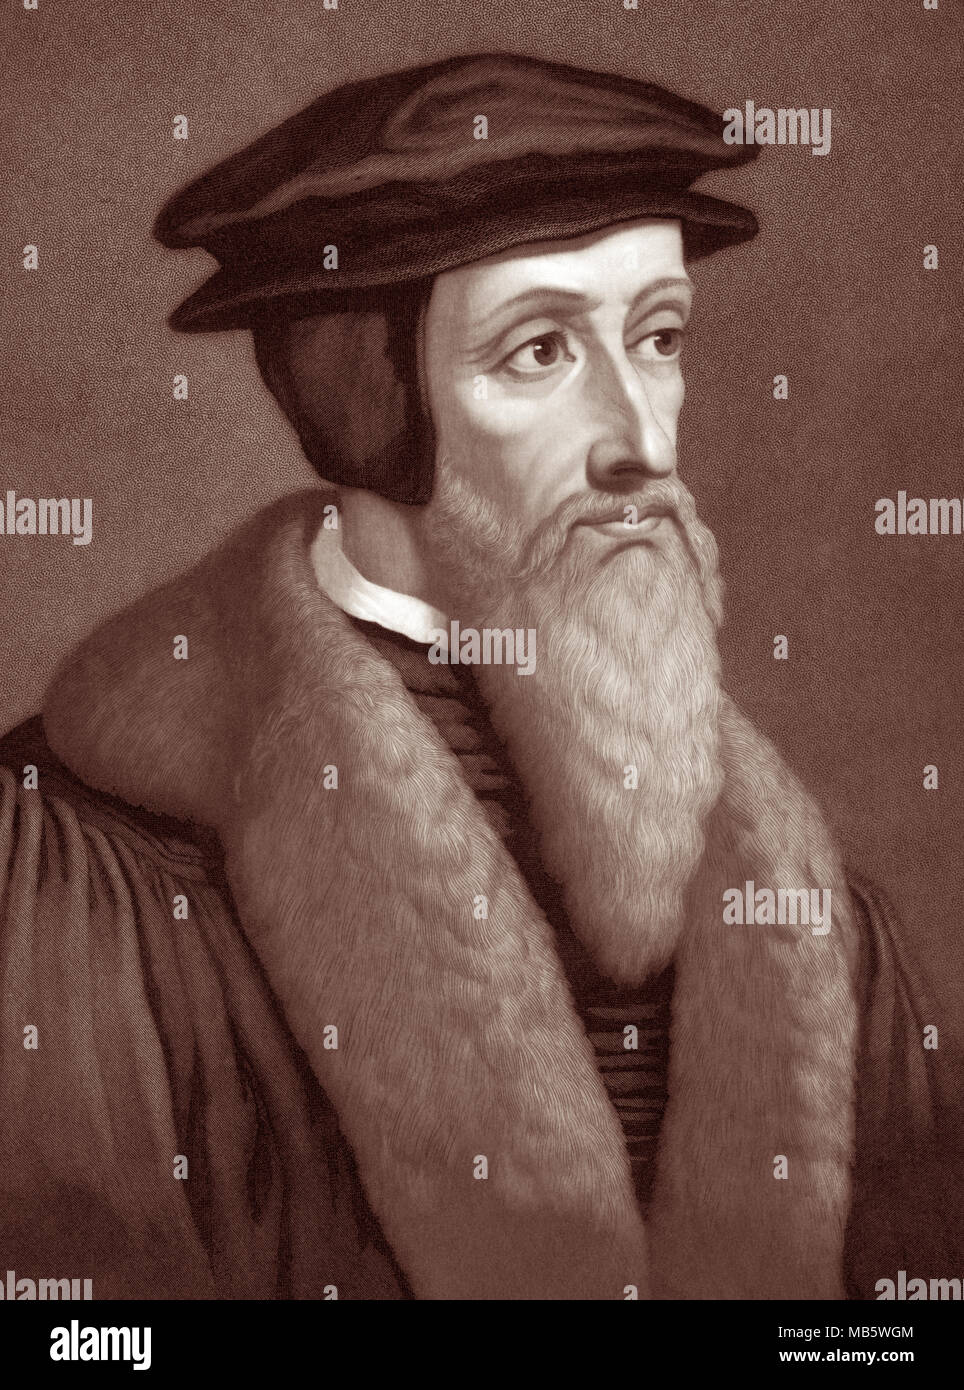 John Calvin (1509–1564) was a French Protestant theologian, pastor and key reformer in Geneva, Switzerland during the Protestant Reformation. His views of Christian theology later become known as Calvinism. Stock Photo